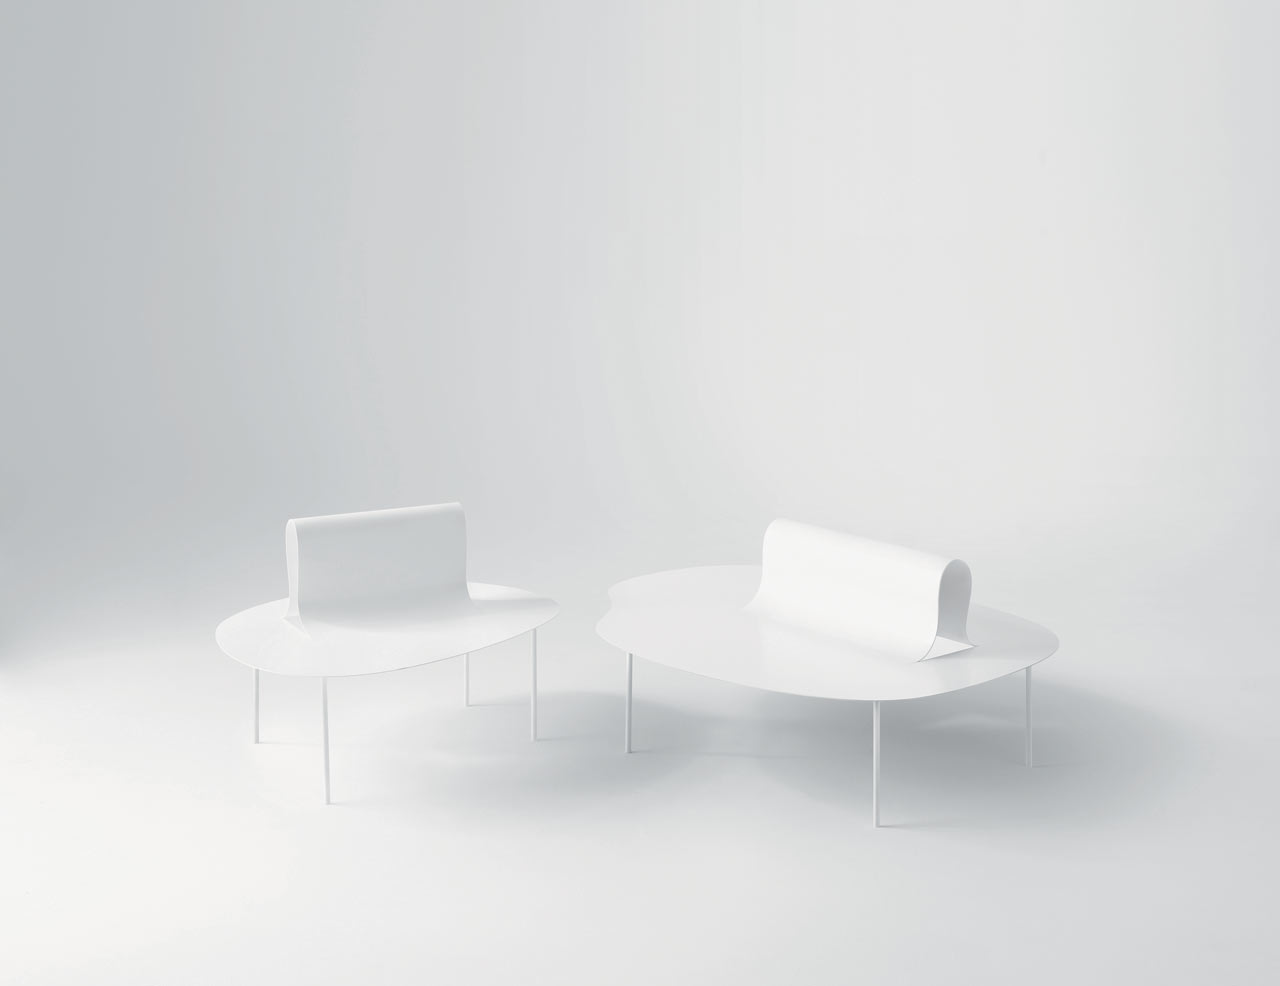 A Furniture Collection That Looks Like It’s Softer Than Steel